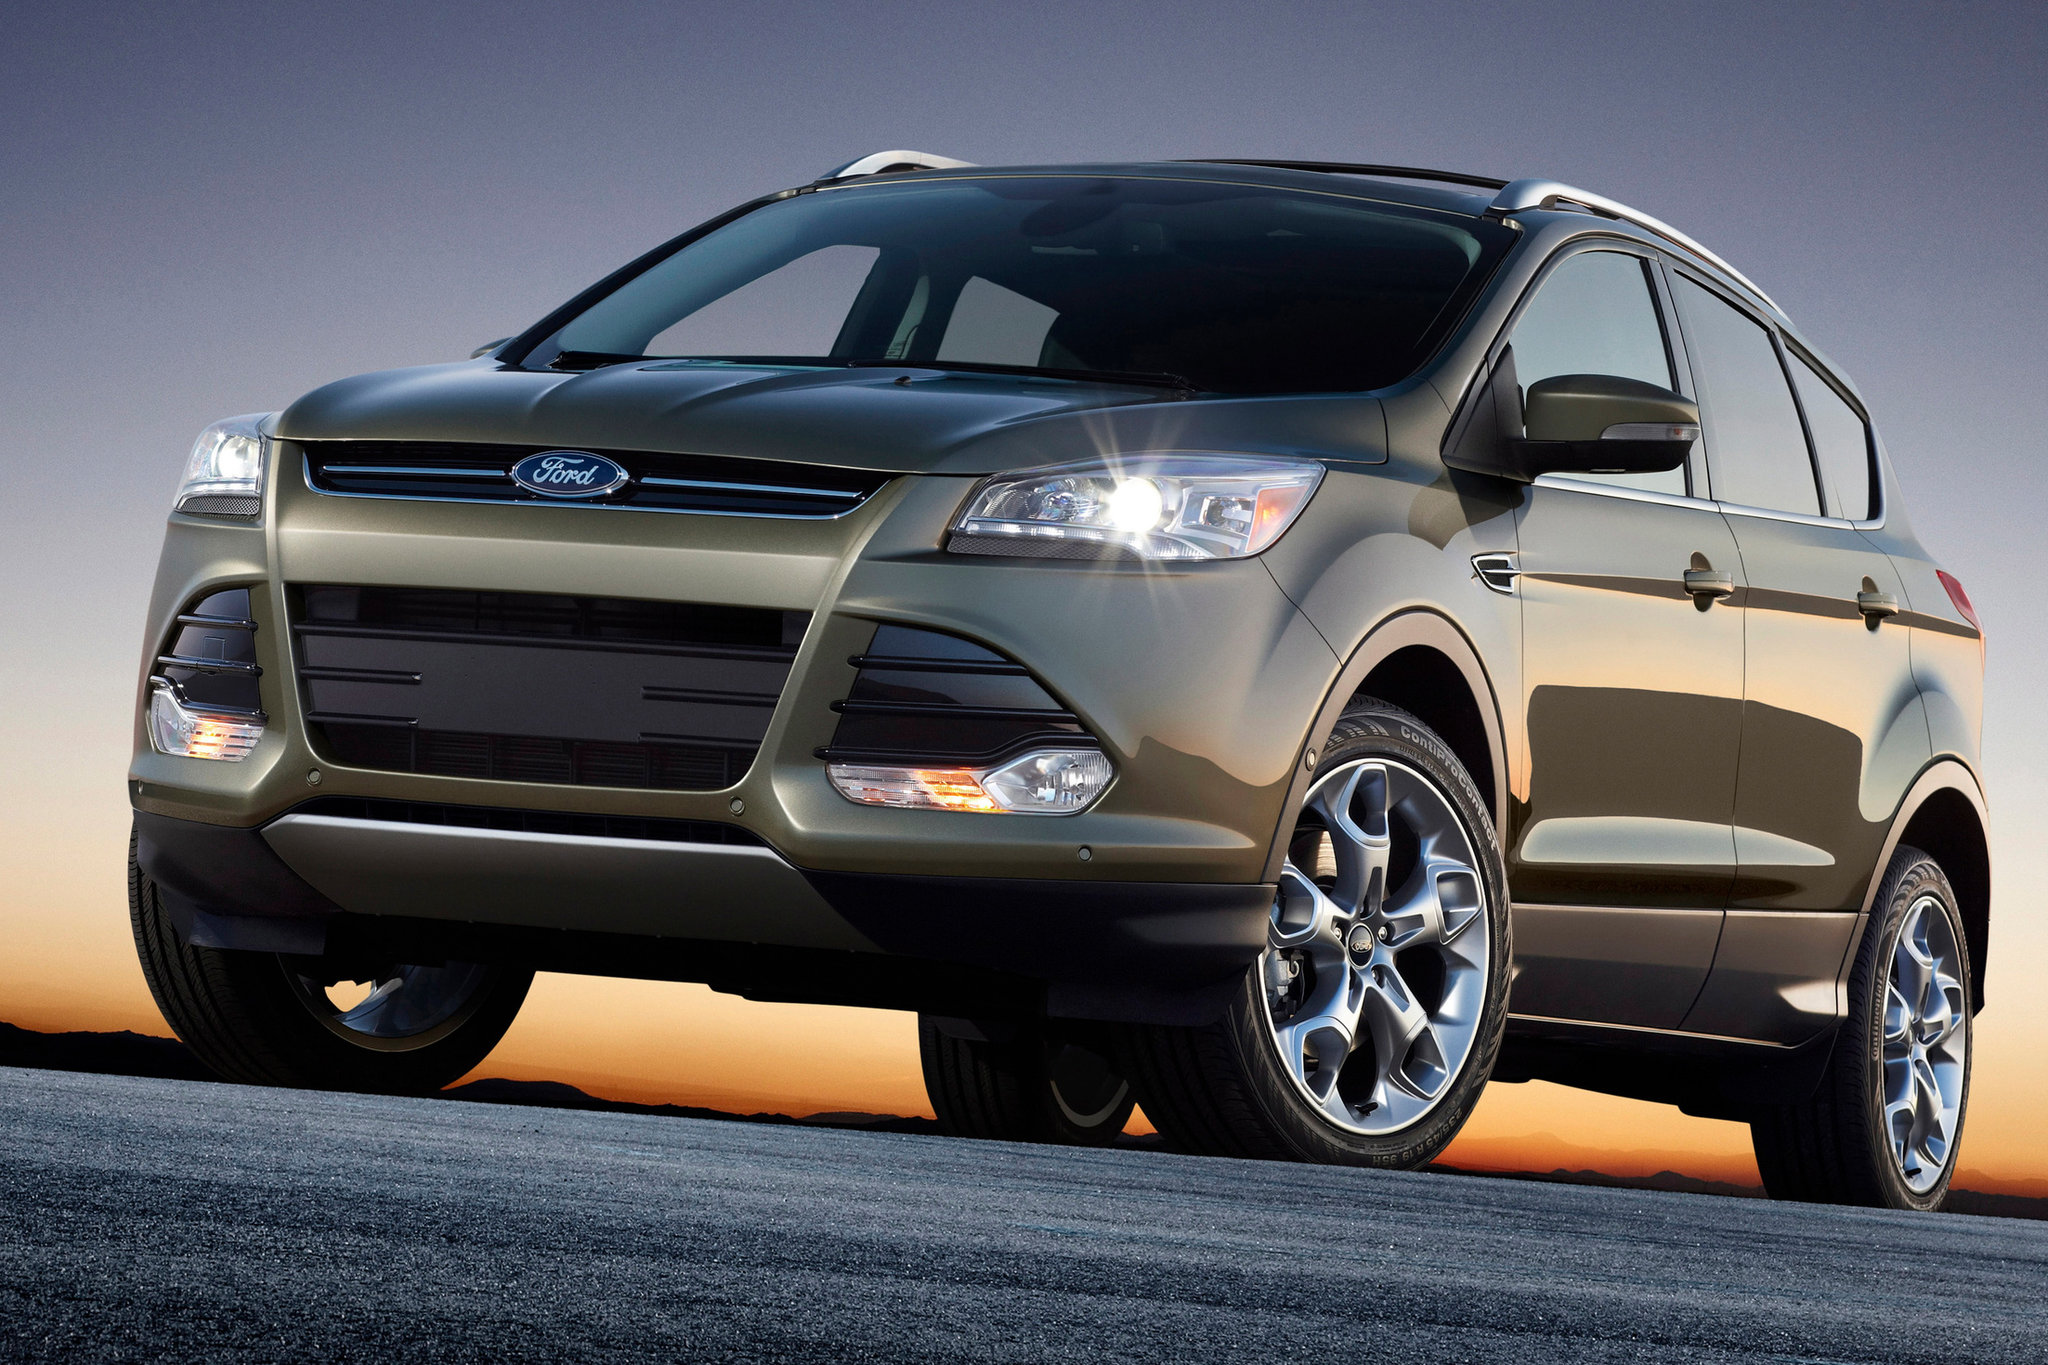 Ford Discloses Two New Recalls for the 2013 Escape - The New York Times